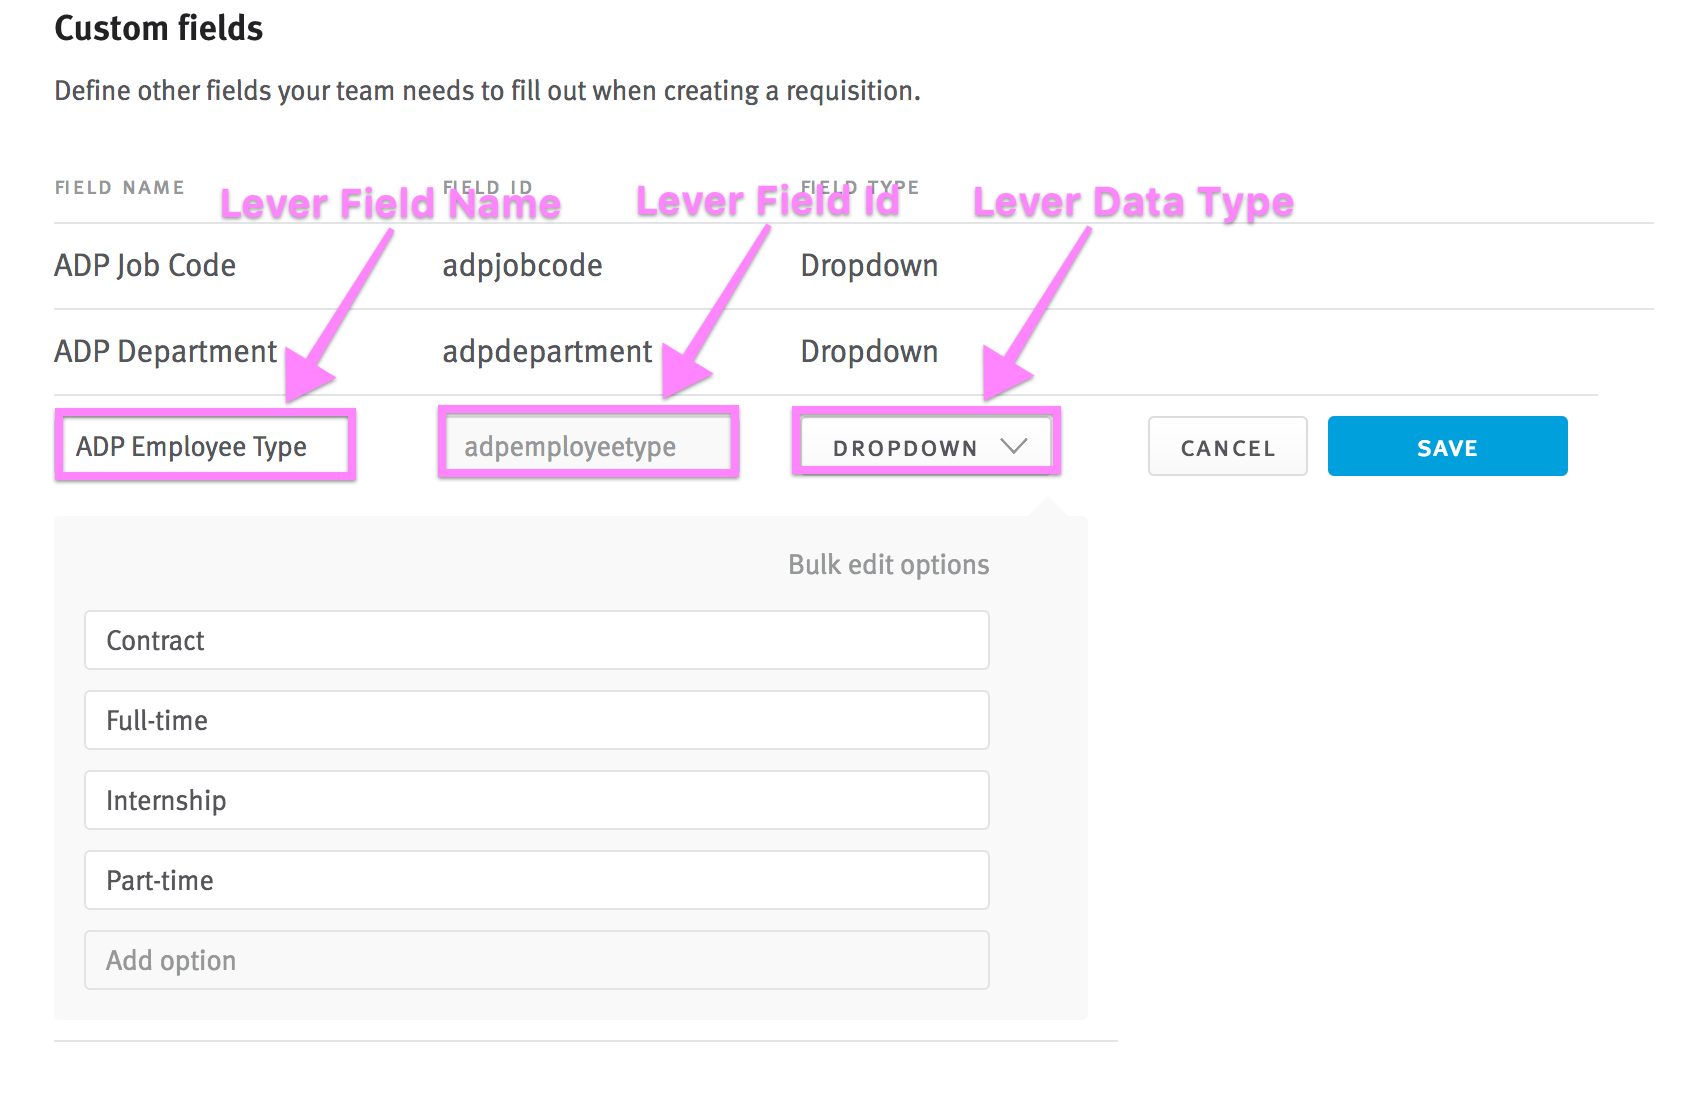 Custom fields section of Requisitions Settings page with new field inputs expanded and arrows pointing to field name (ADP Employee Type), Field id (adpemployeetype) and data type (dropdown).